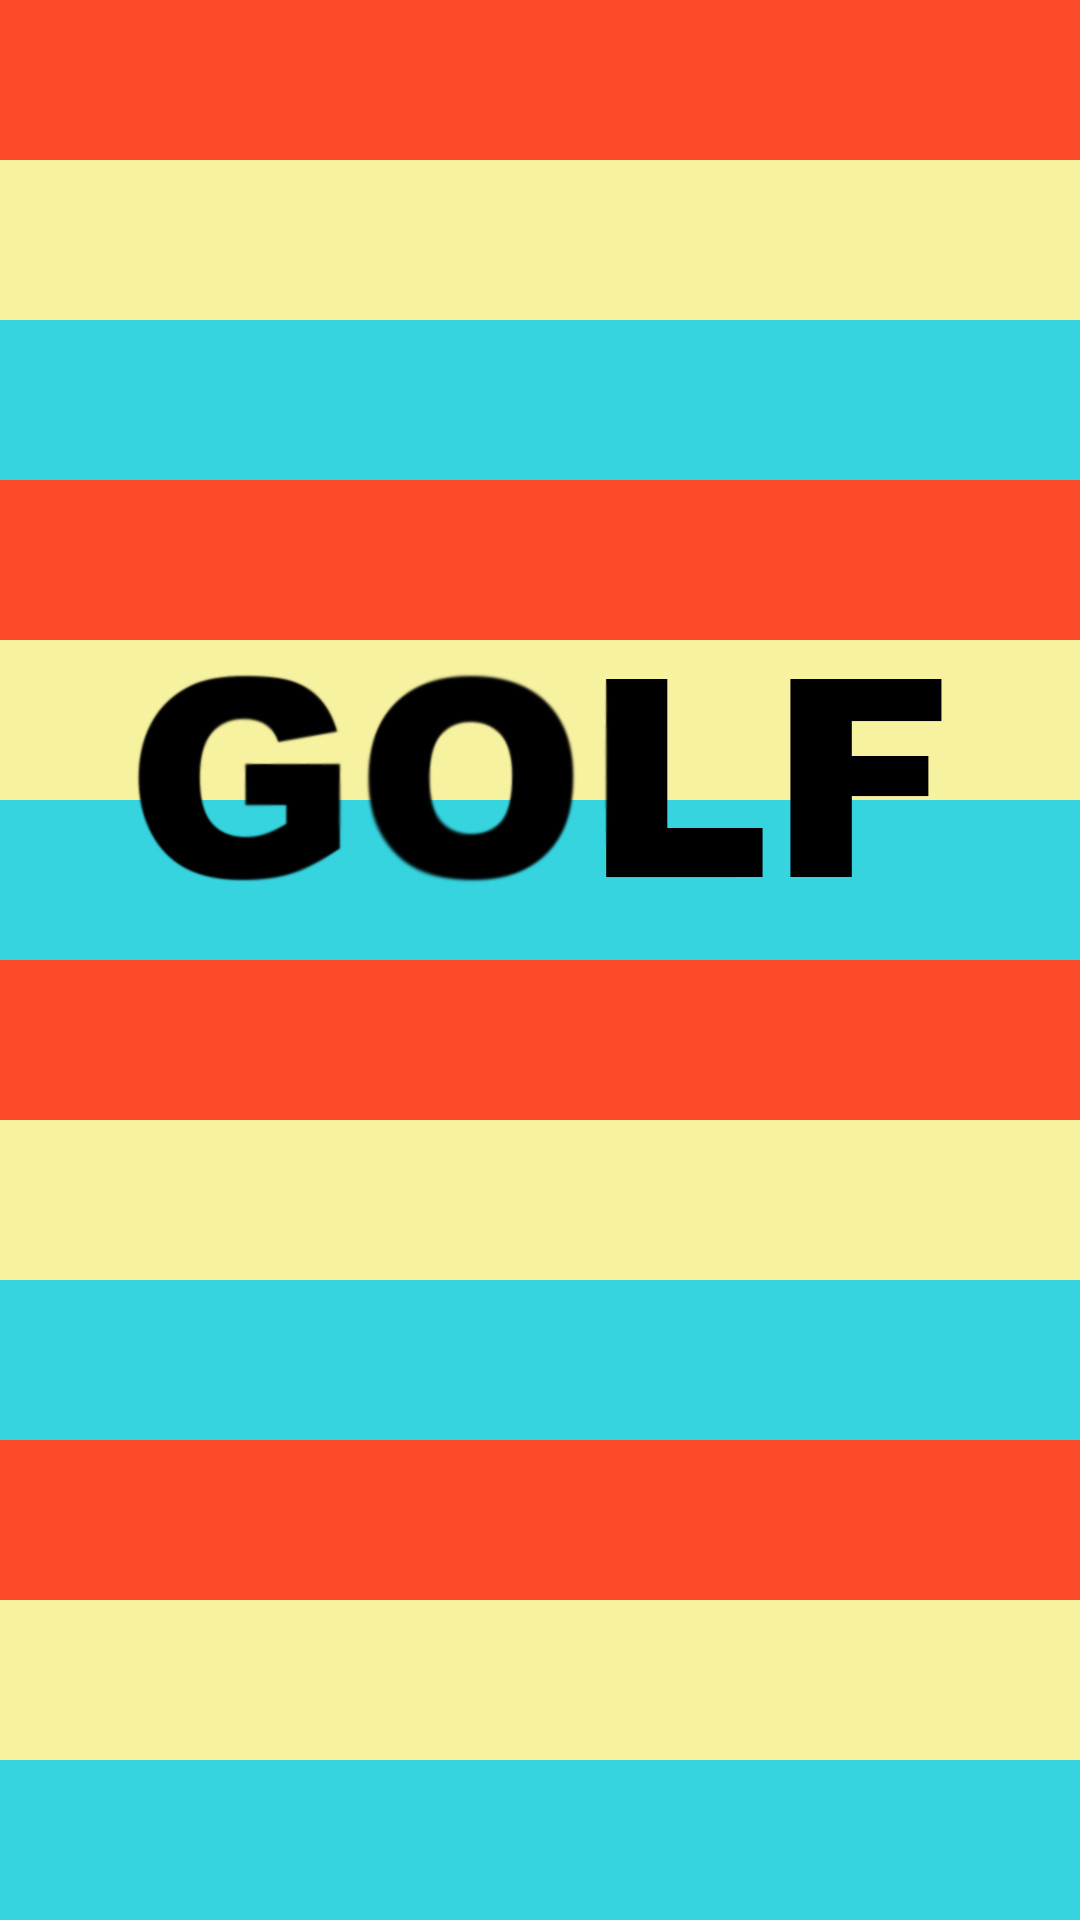 GOLF Striped Mobile Wallpaper (1080×1920) Need #iPhone #6S #Plus #Wallpaper